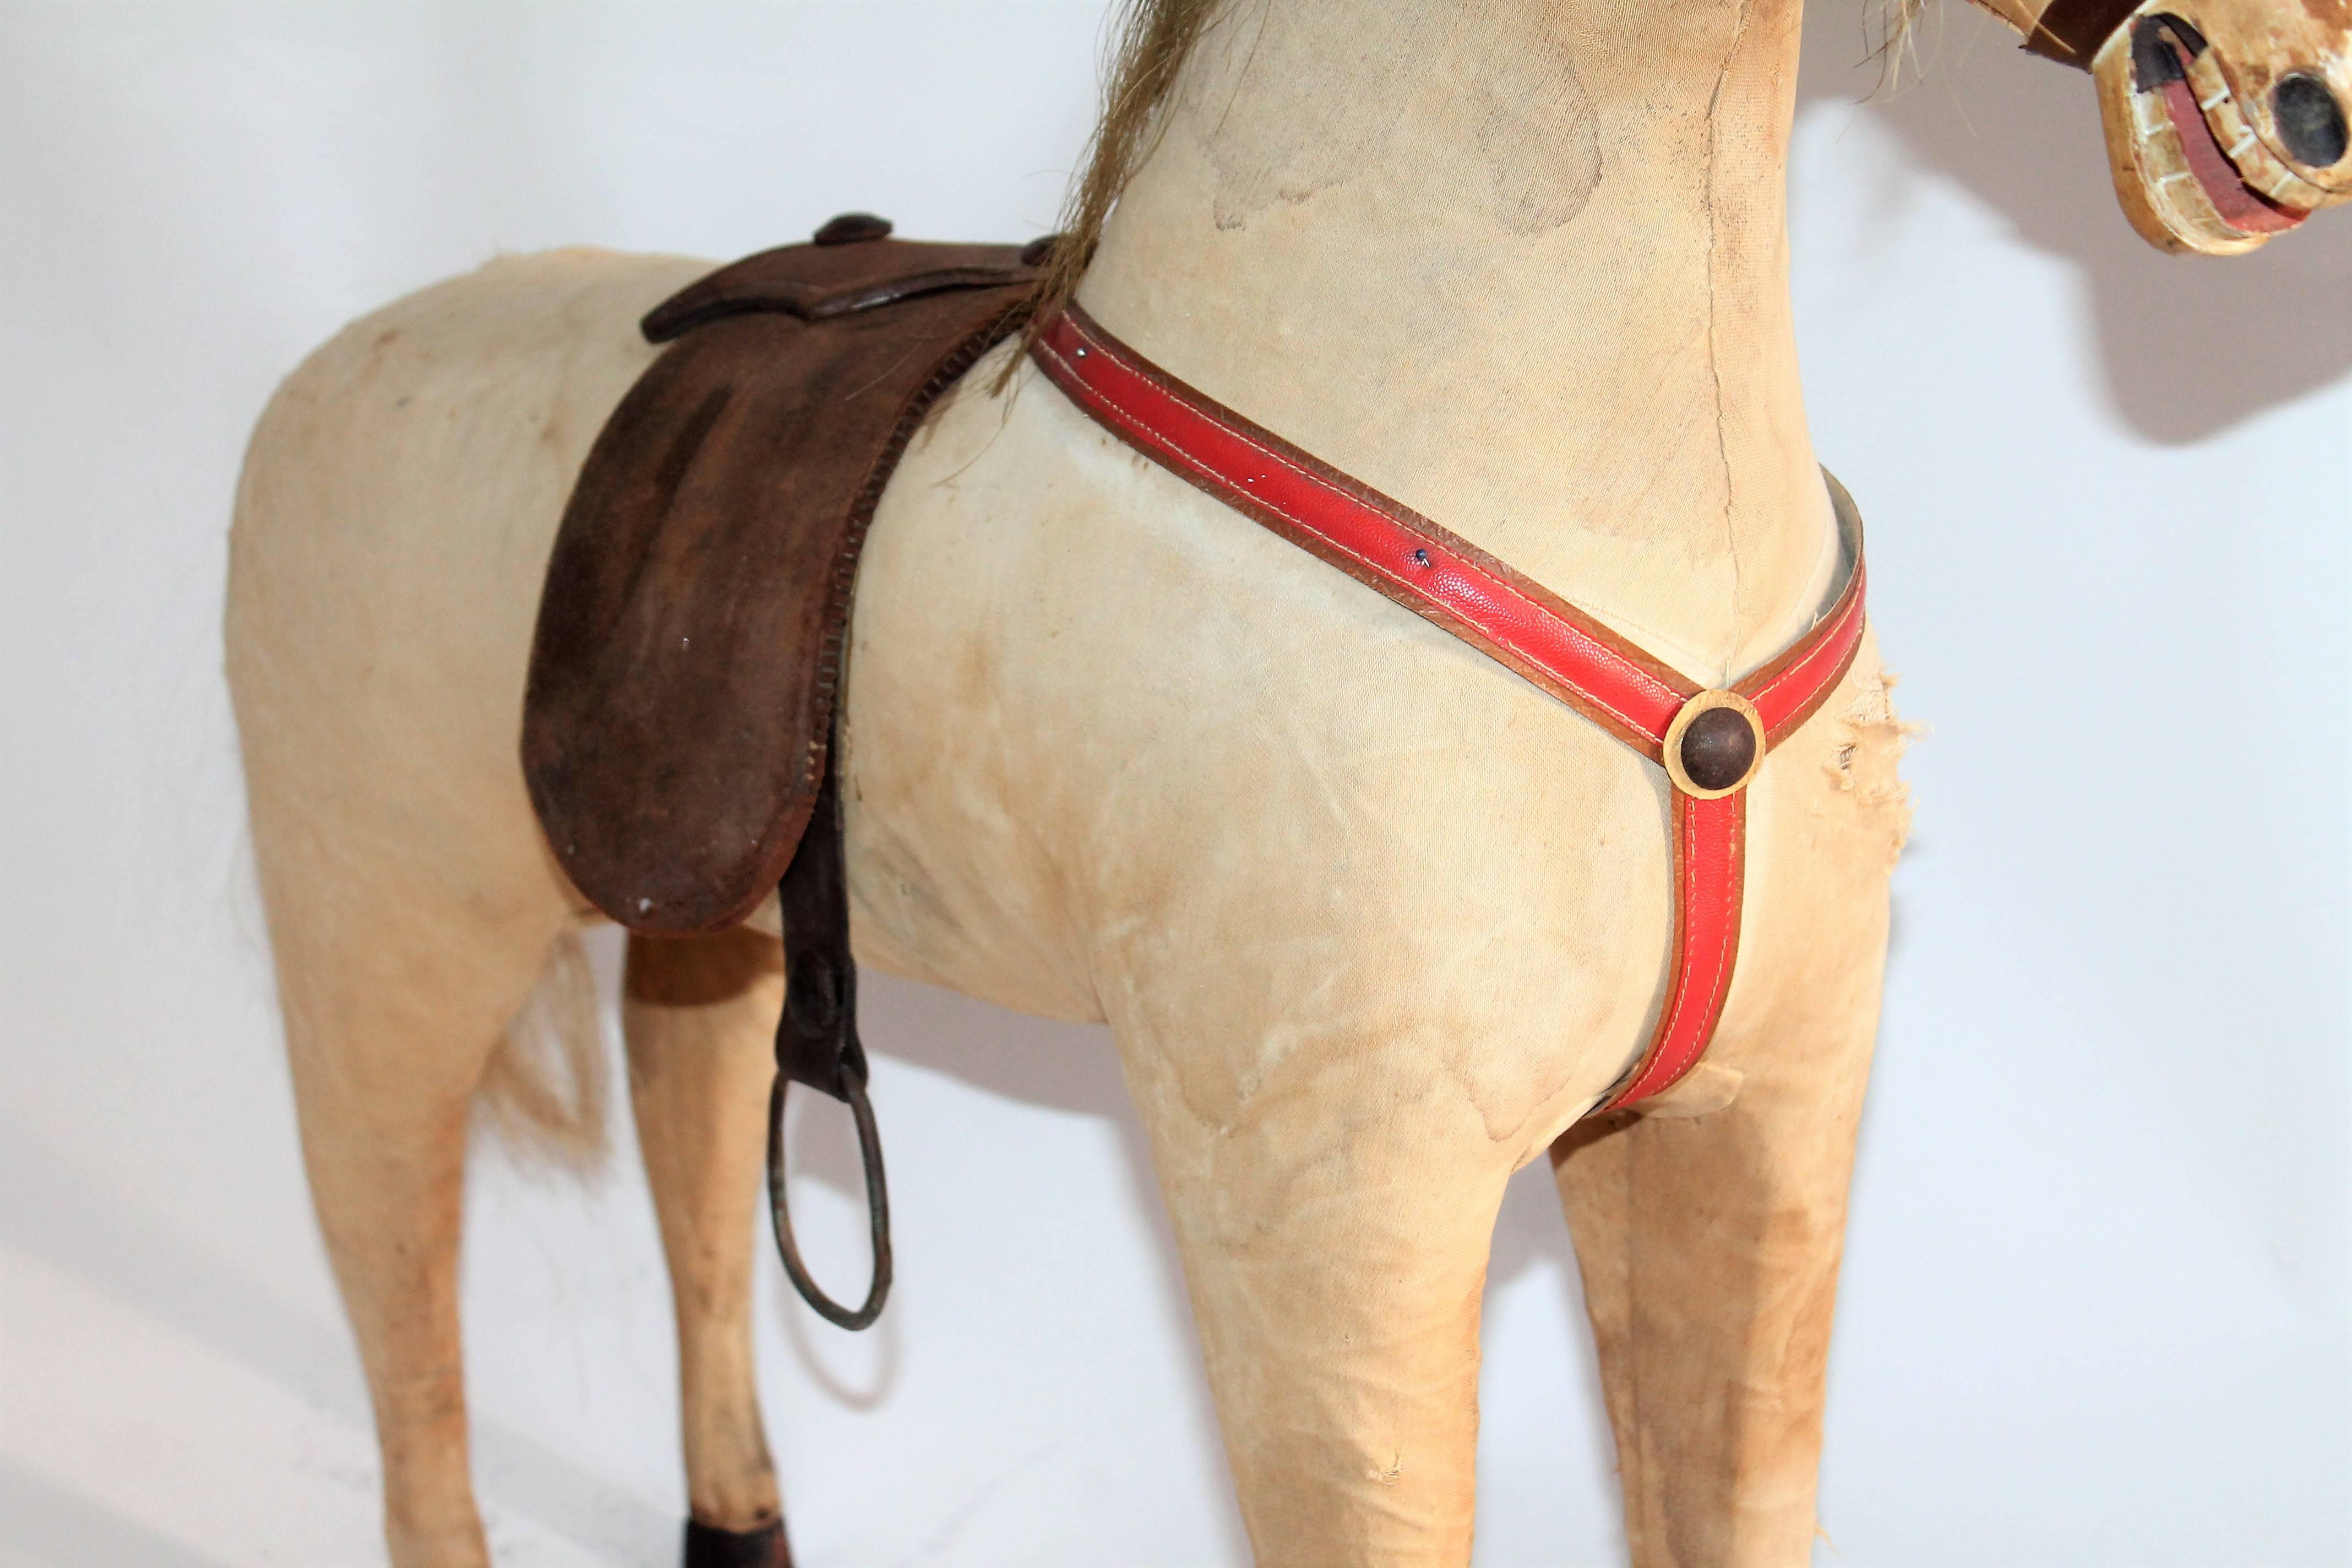 Hand-Crafted 19th Century Monumental Original Canvas and Leather Covered Horse